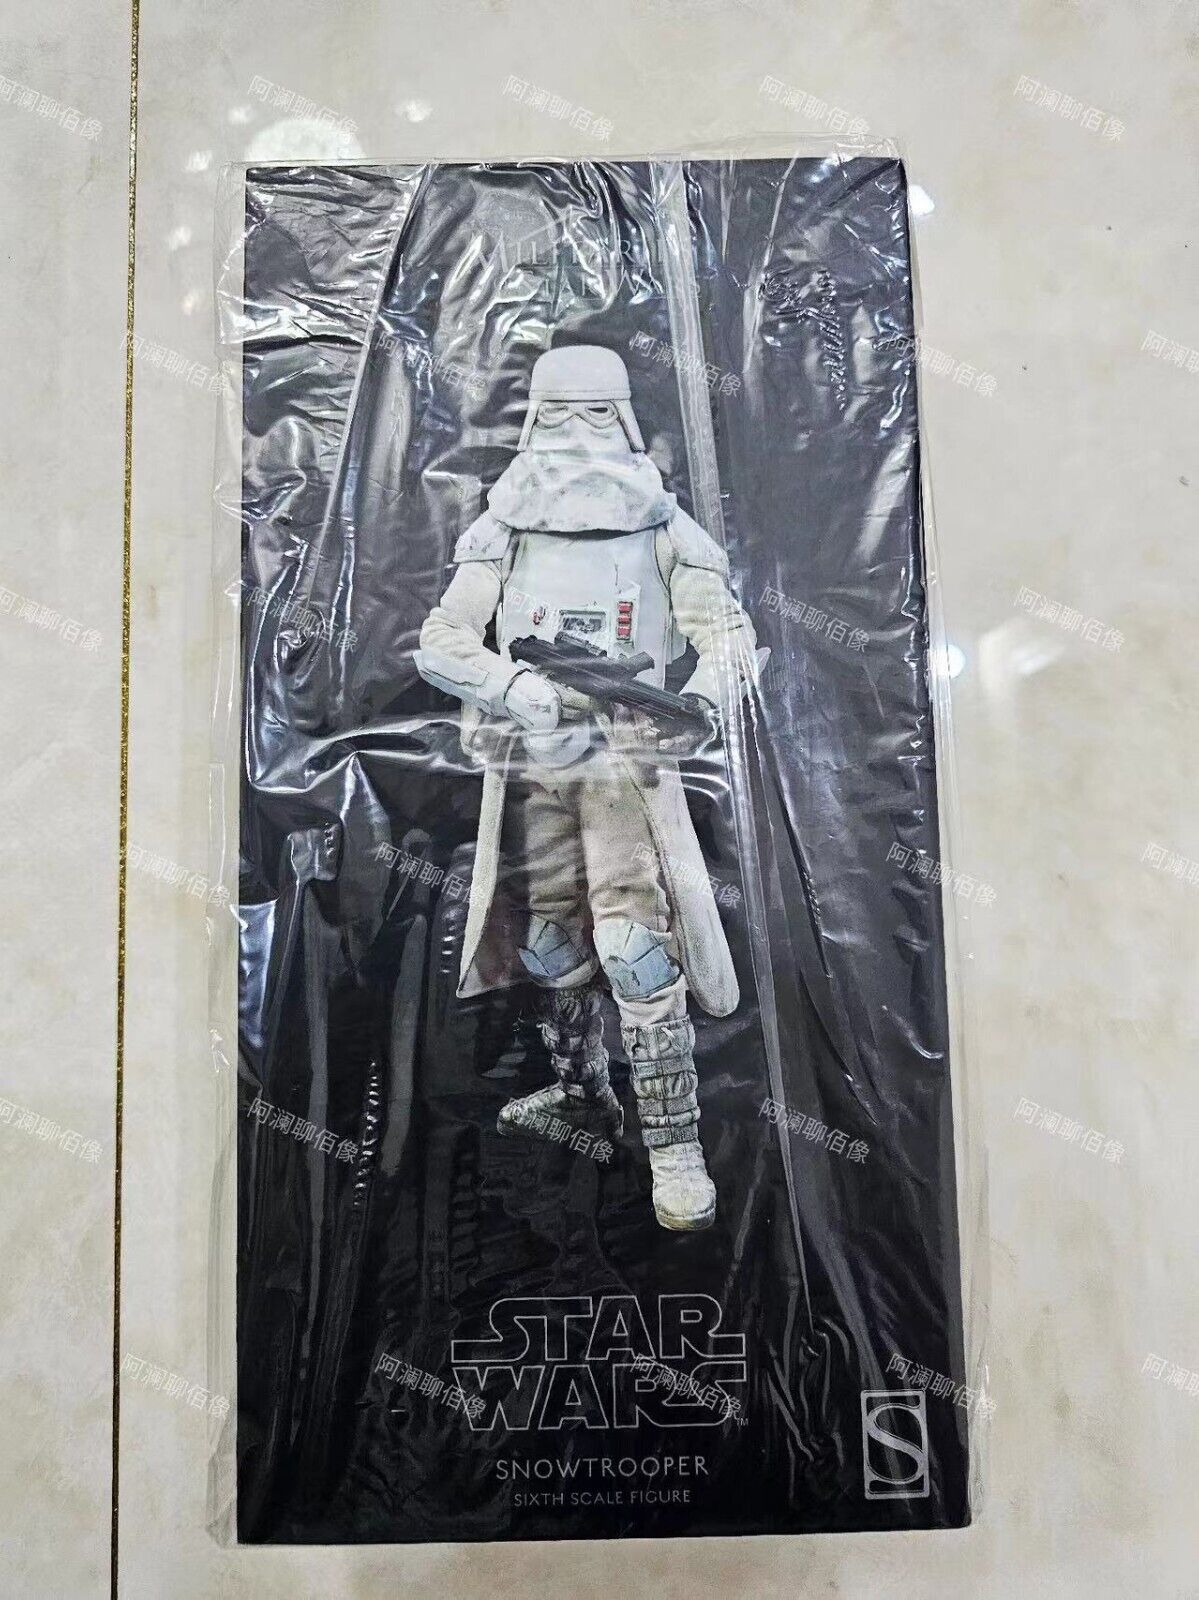 Sideshow Exclusive Snowtrooper Star Wars 1/6 Scale Hoth Stormtrooper